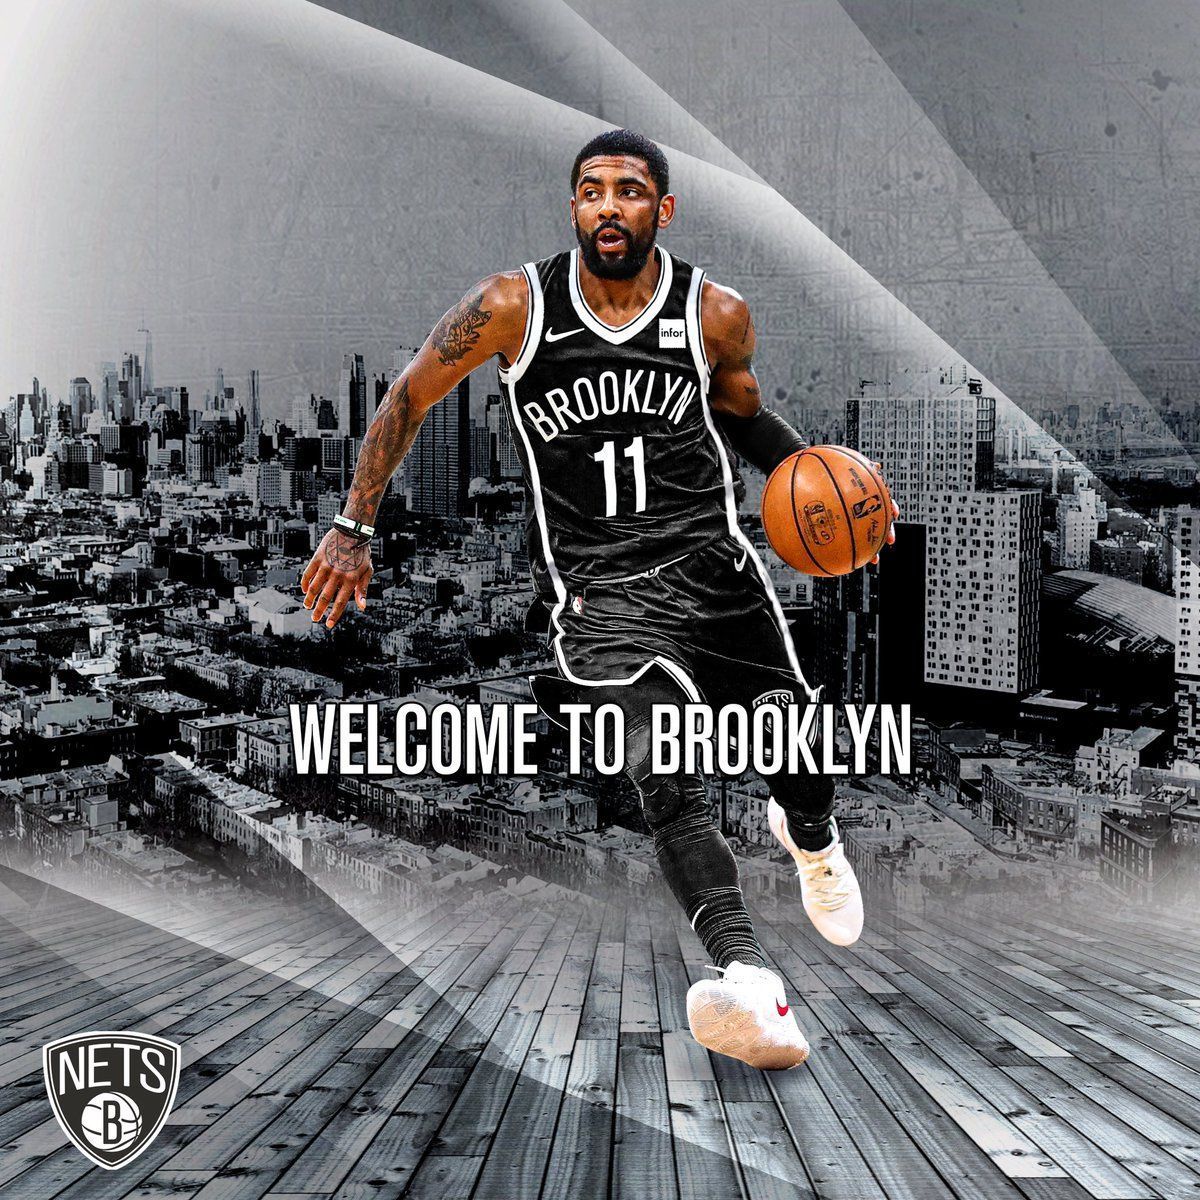 Kyrie Irving Nets Wallpaper Free Kyrie Irving Nets Background